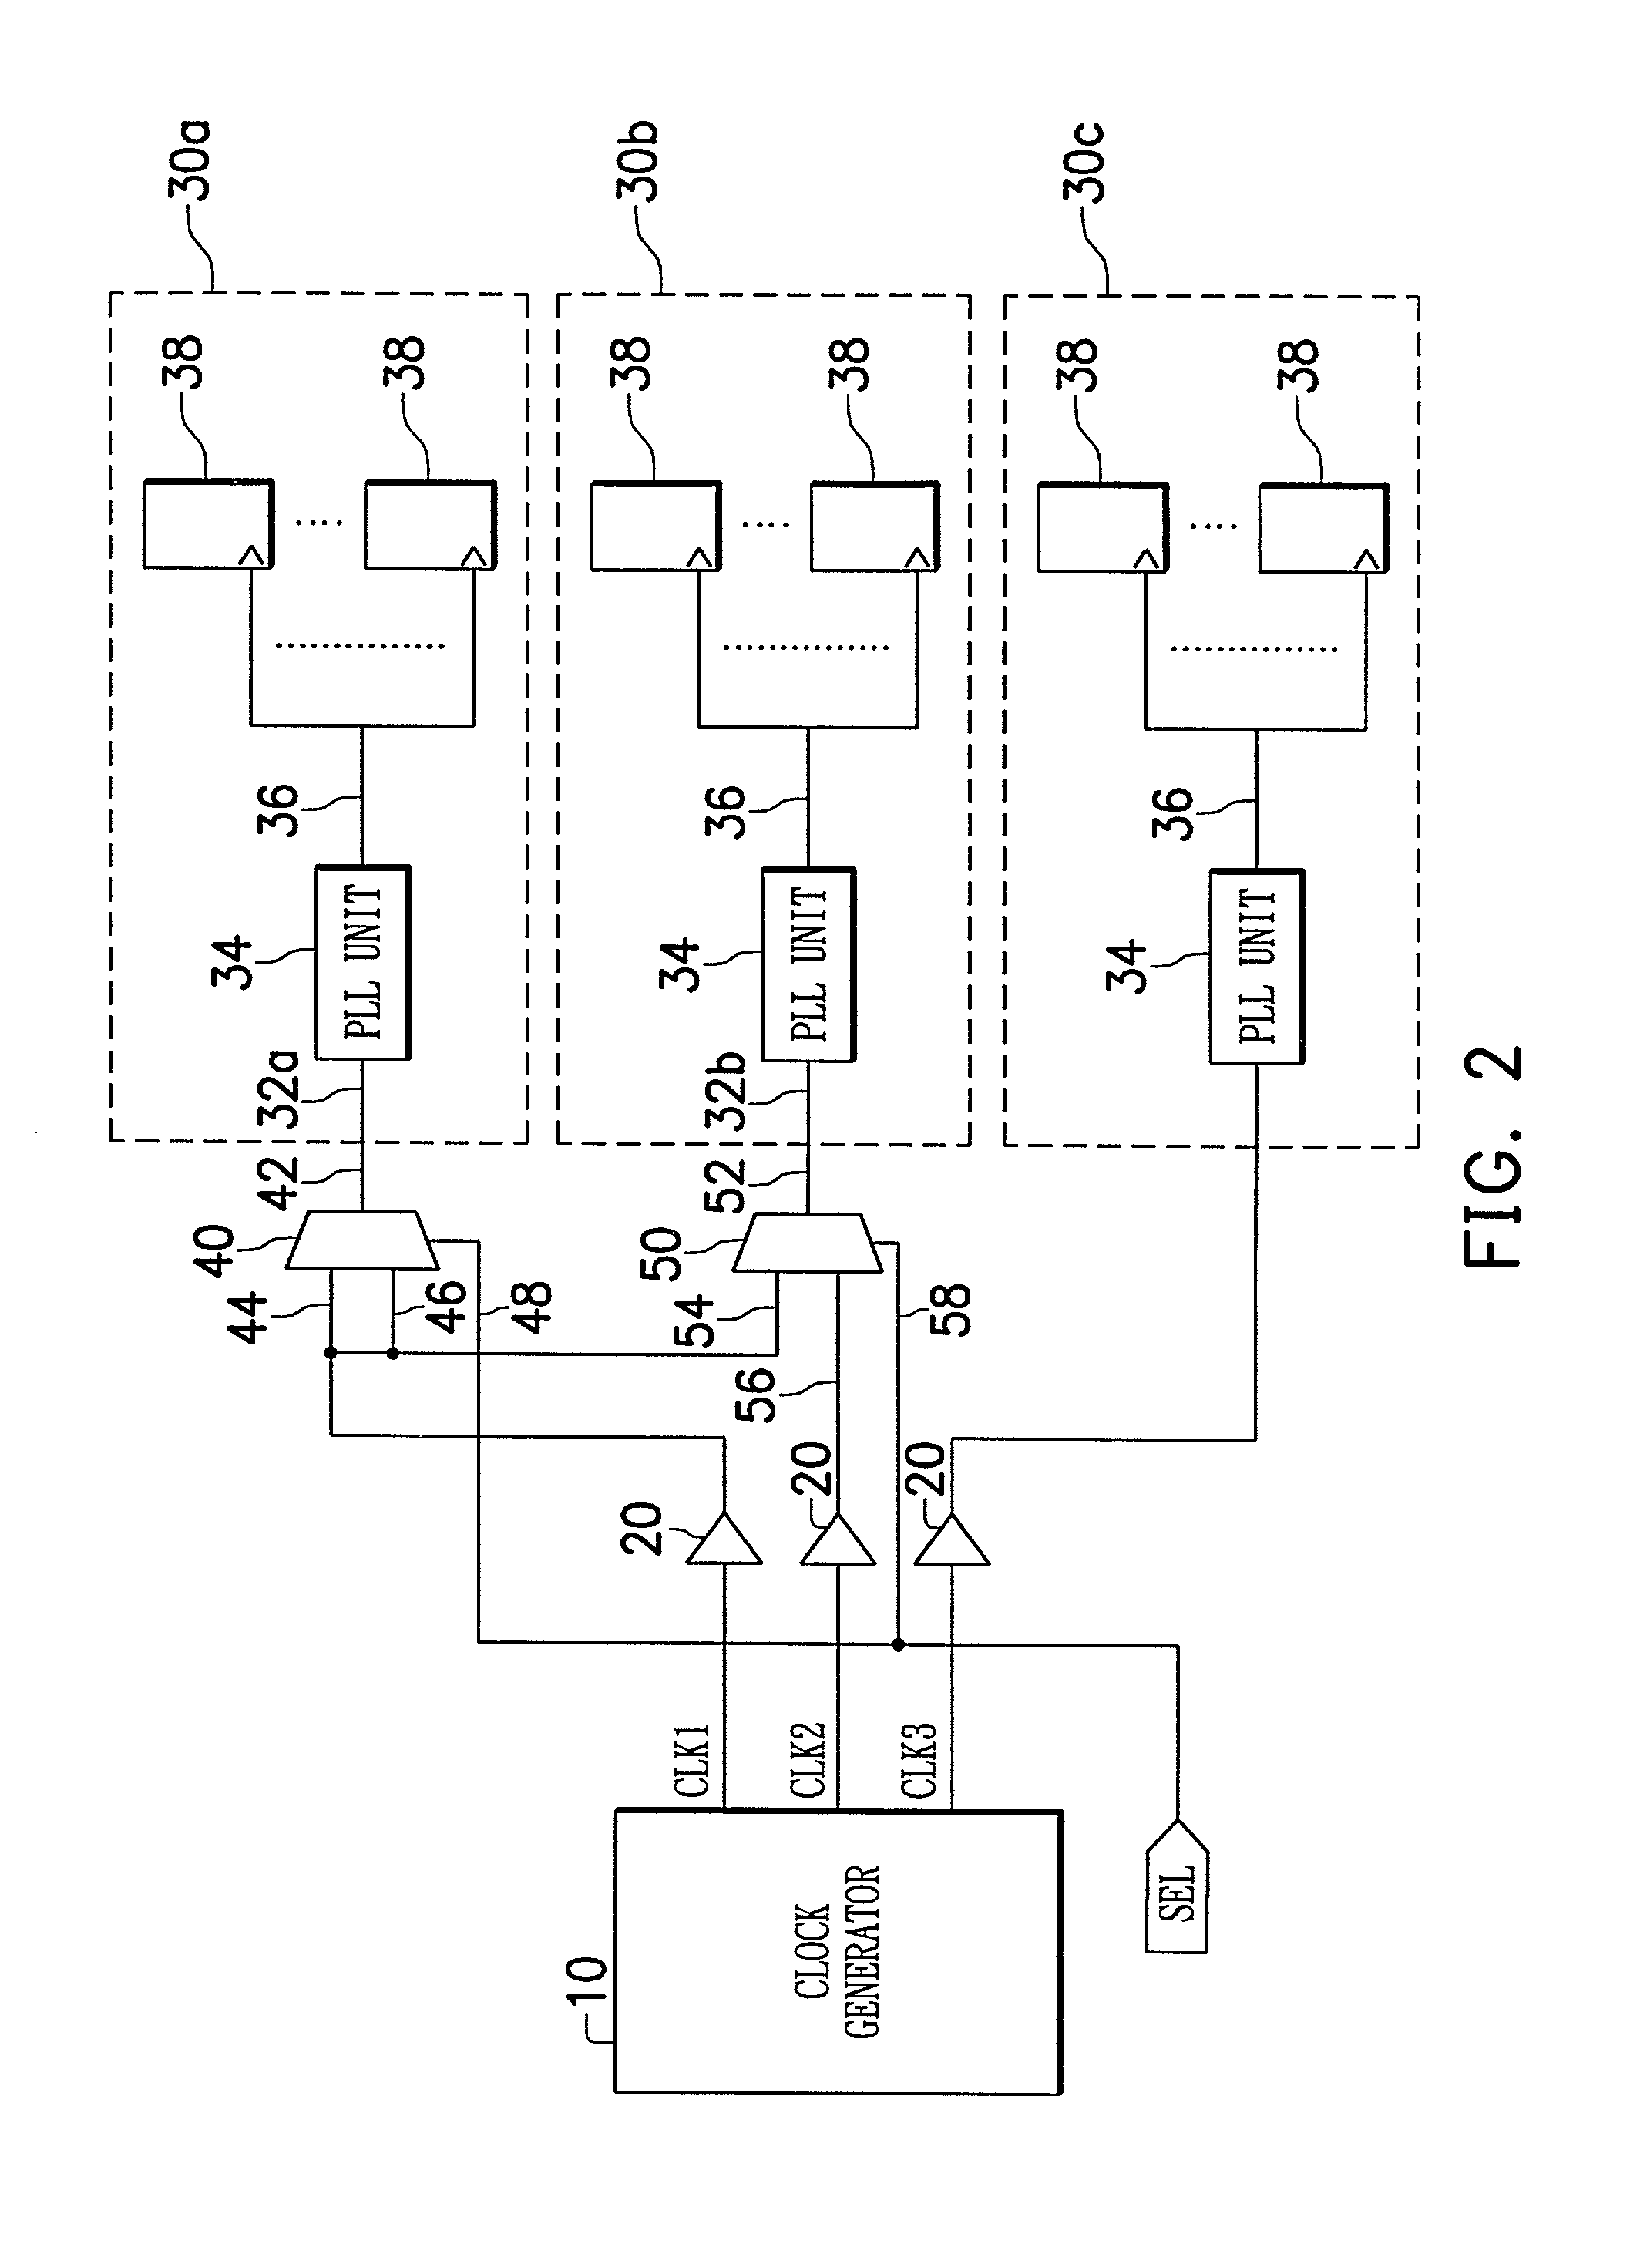 Method and apparatus for reducing clock skew in an integrated circuit